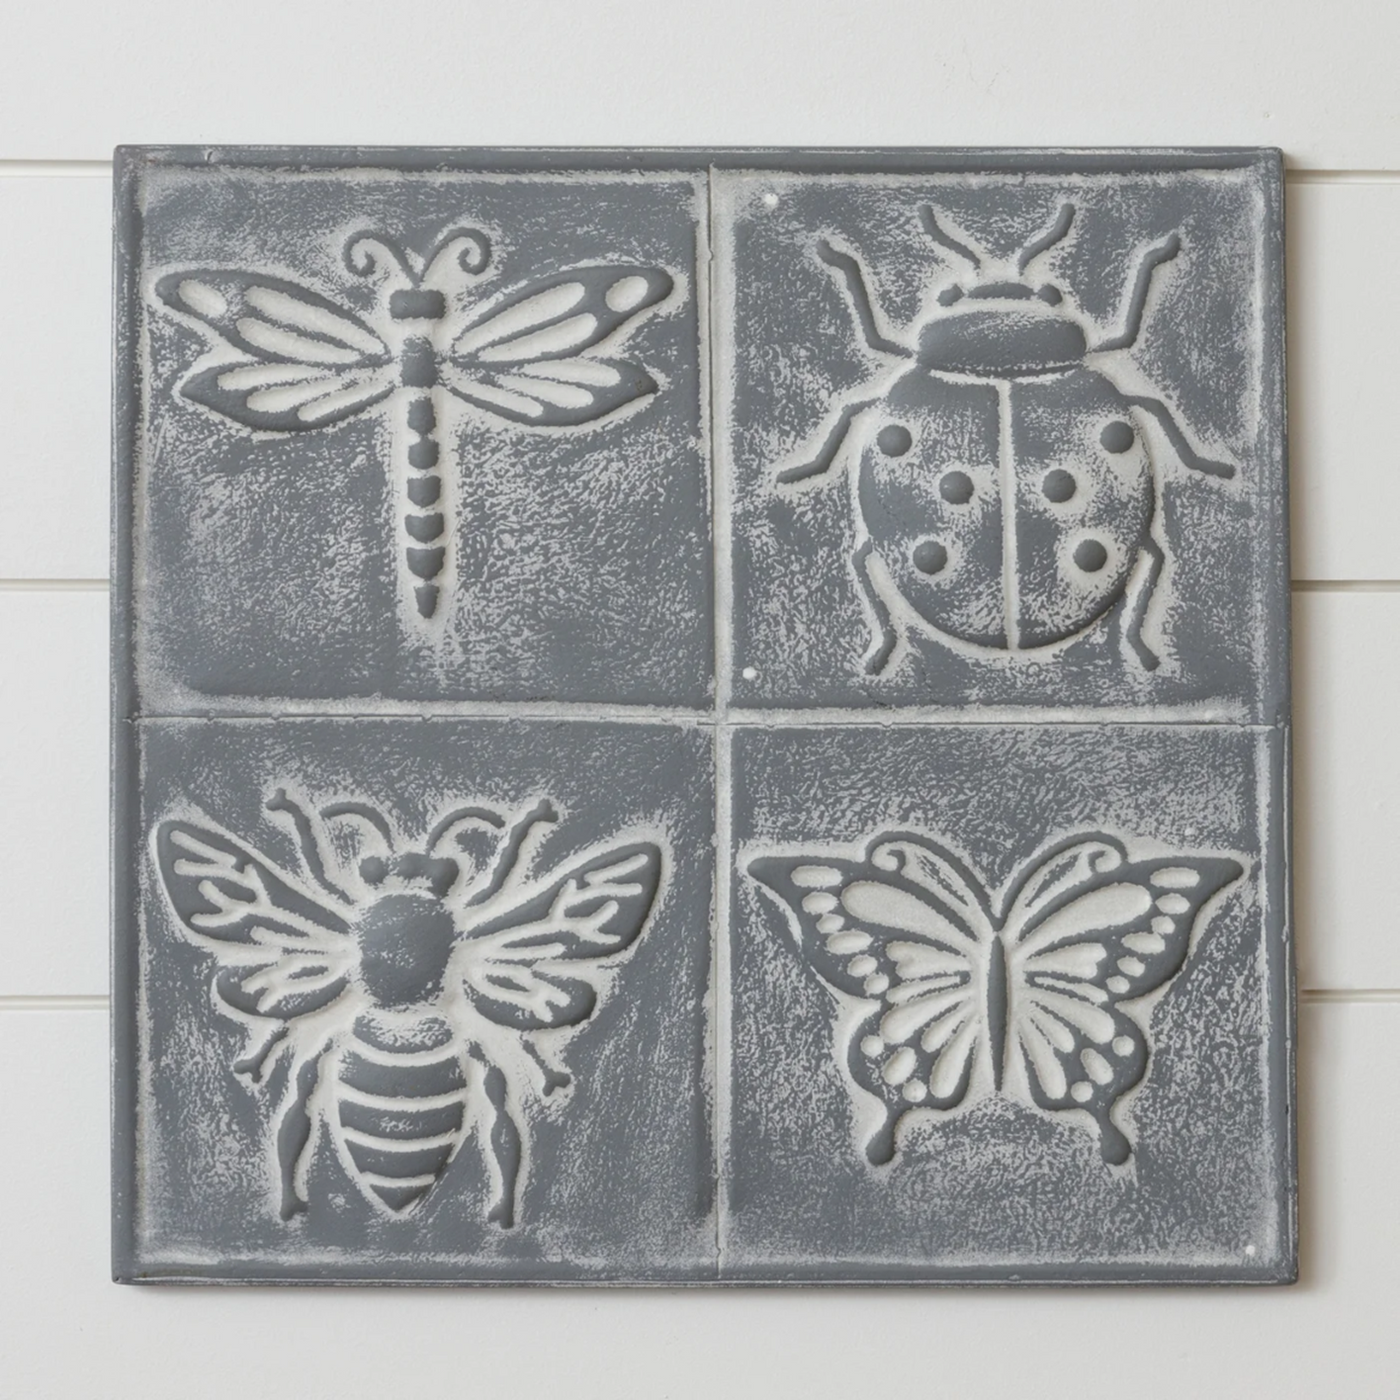 Embossed Insects Distressed Metal Wall Decor 12"